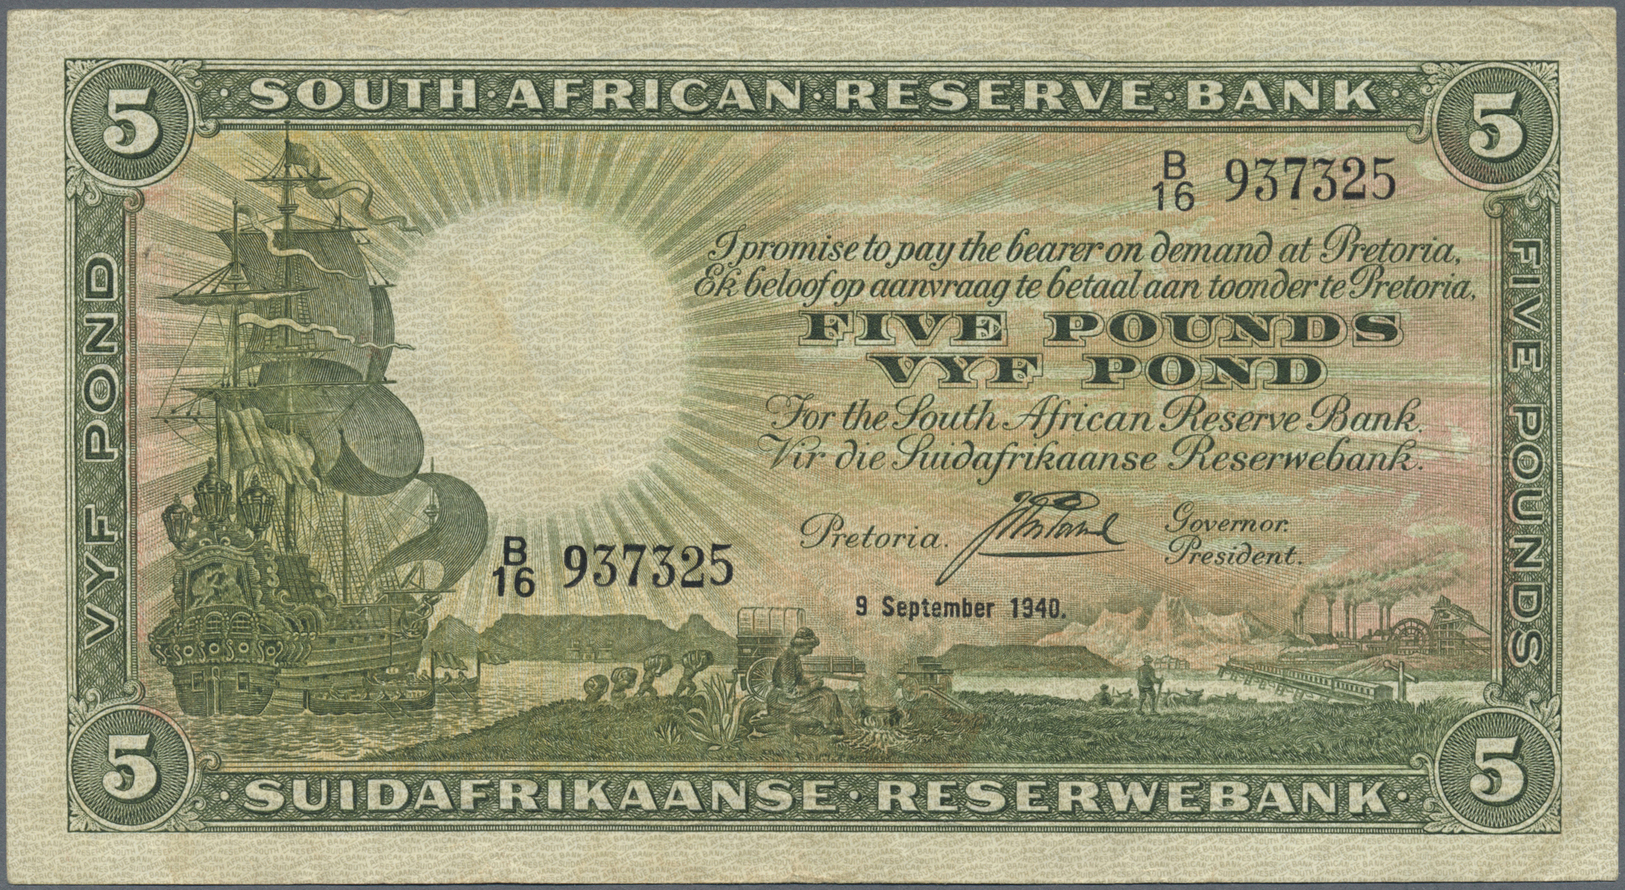 02948 South Africa / Südafrika: 5 Pounds 1940 P. 86, Used With Folds And Creases But No Holes Or Tears, Still Strongness - Afrique Du Sud